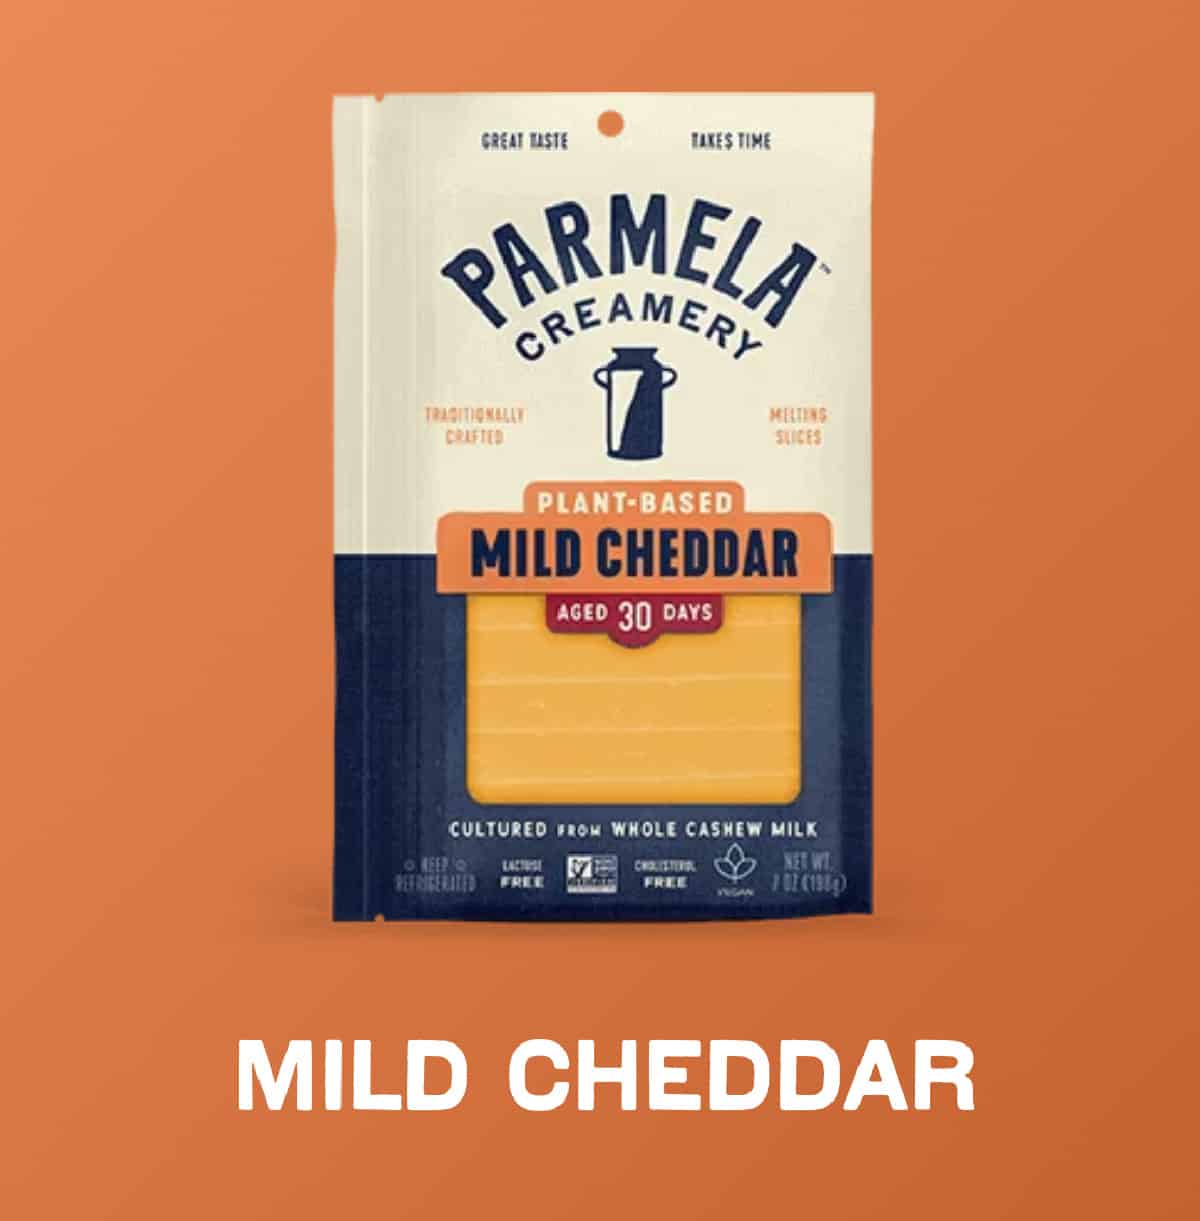 A cream and navy blue package of Parmela Creamery Plant-Based Mild Cheddar Slices against a dark orange background. 